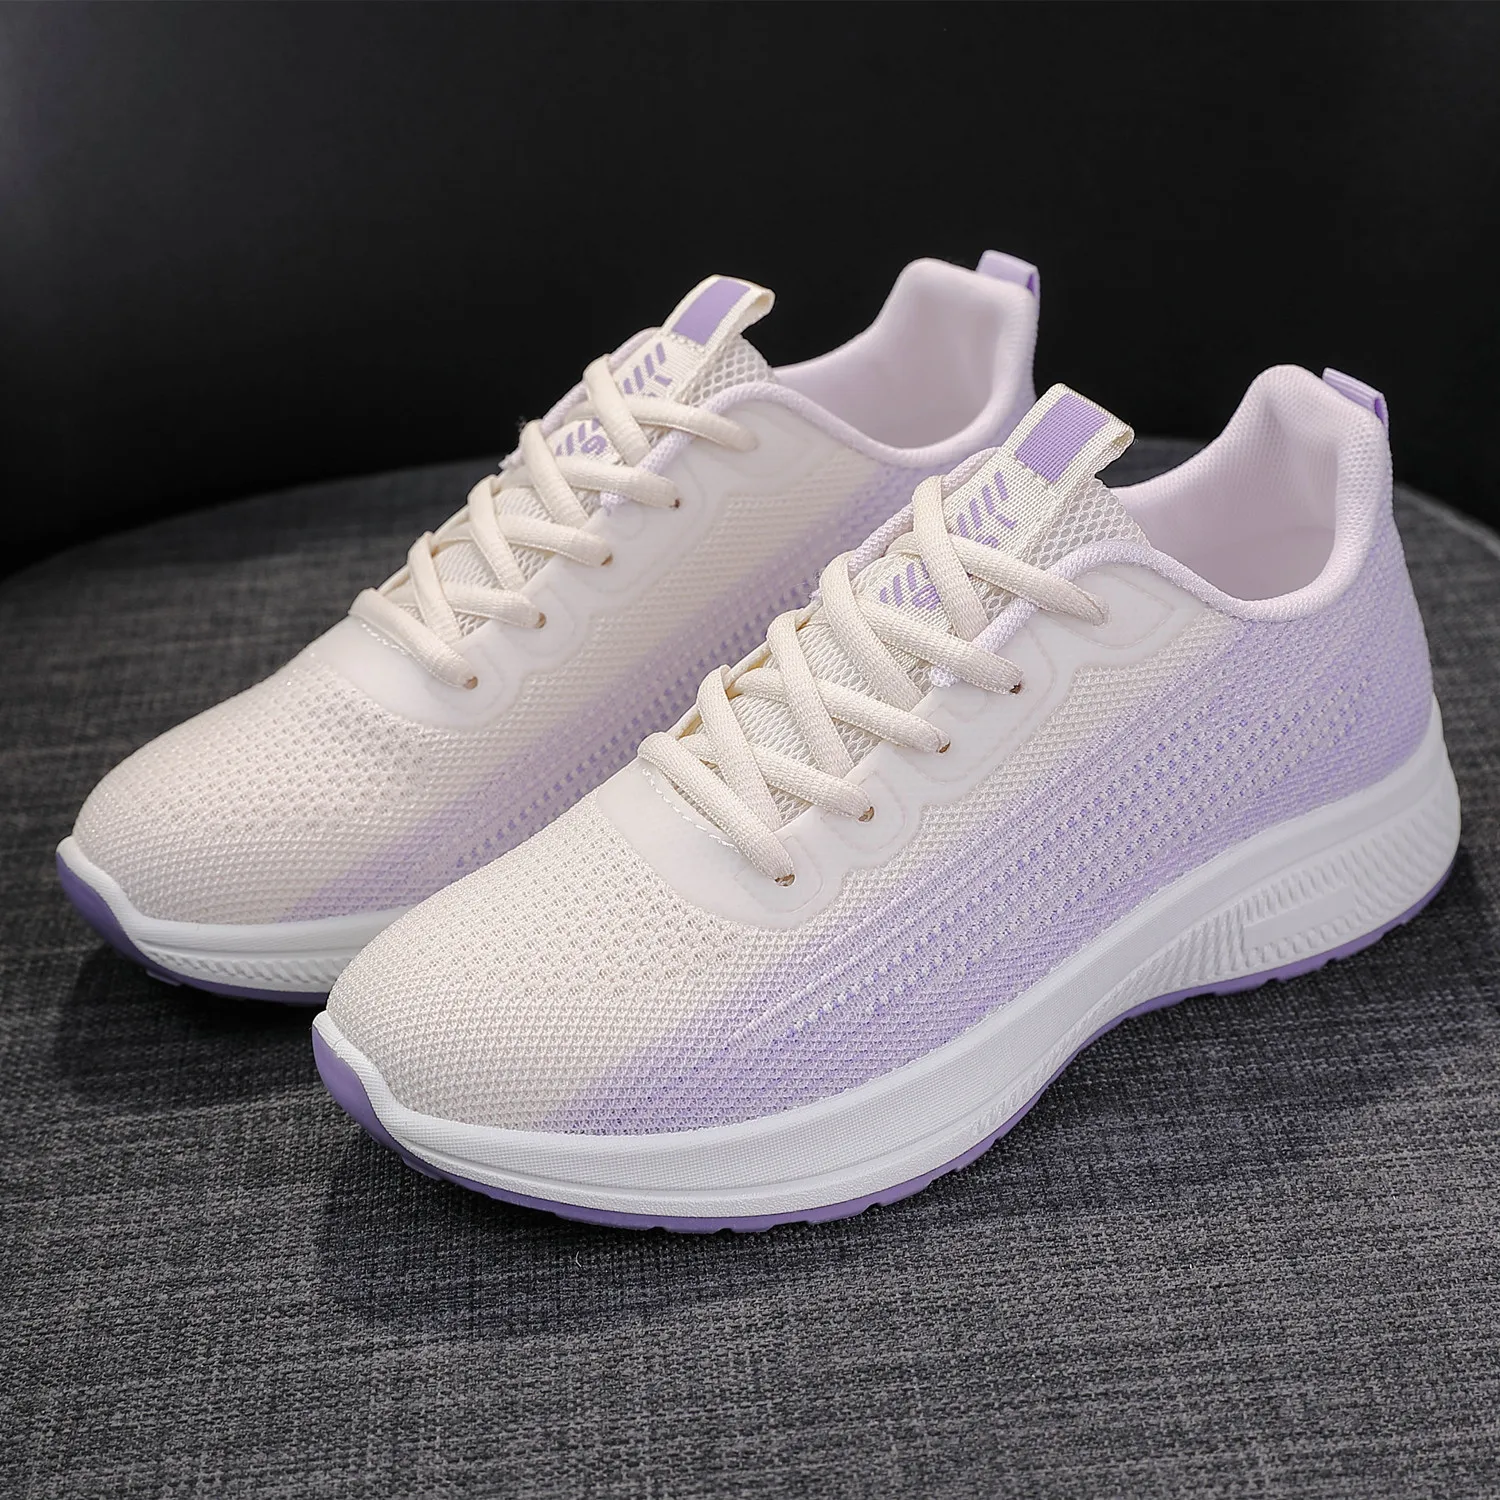 Fashion Sneakers Lightweight Lace Up Training Running Shoes Soft Sole Outdoor Women Sport Shoes